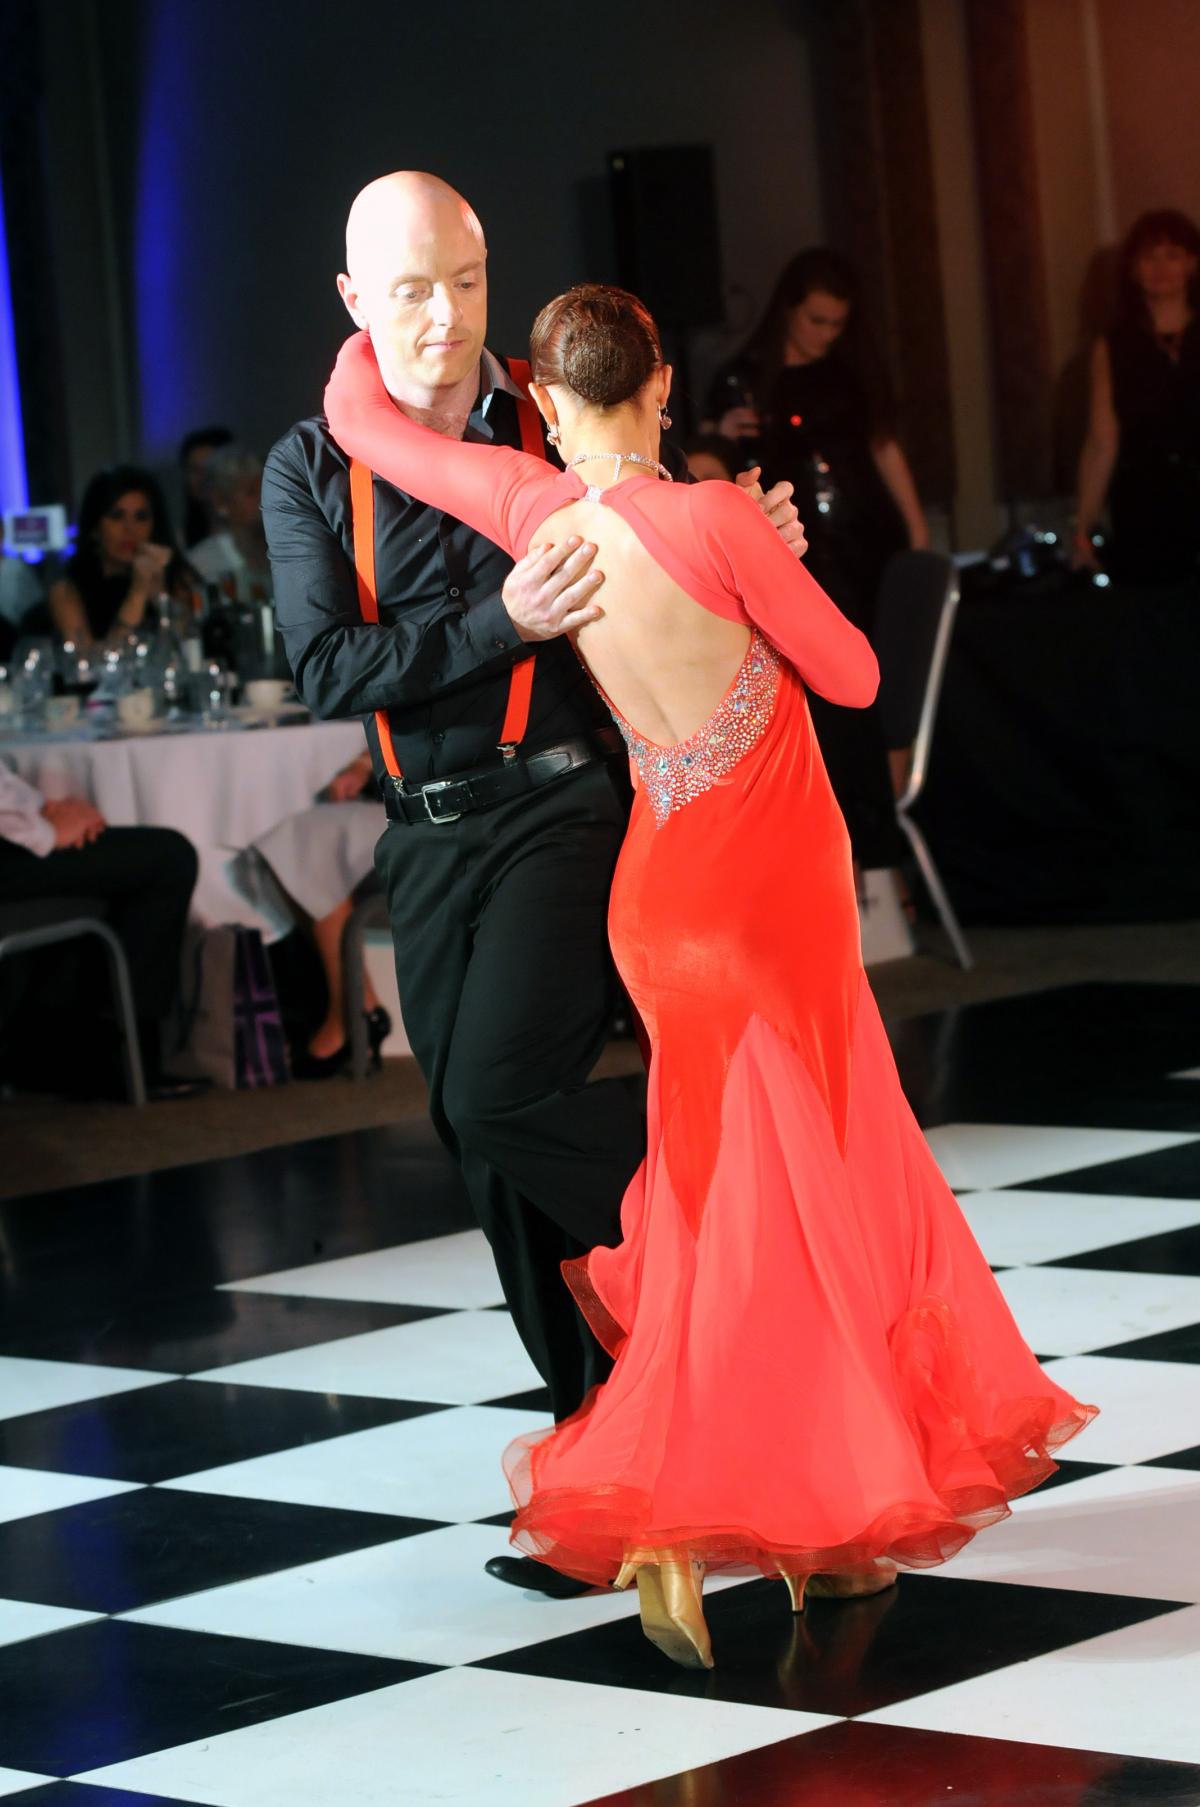 Gary Cookson performs an Argentine tango